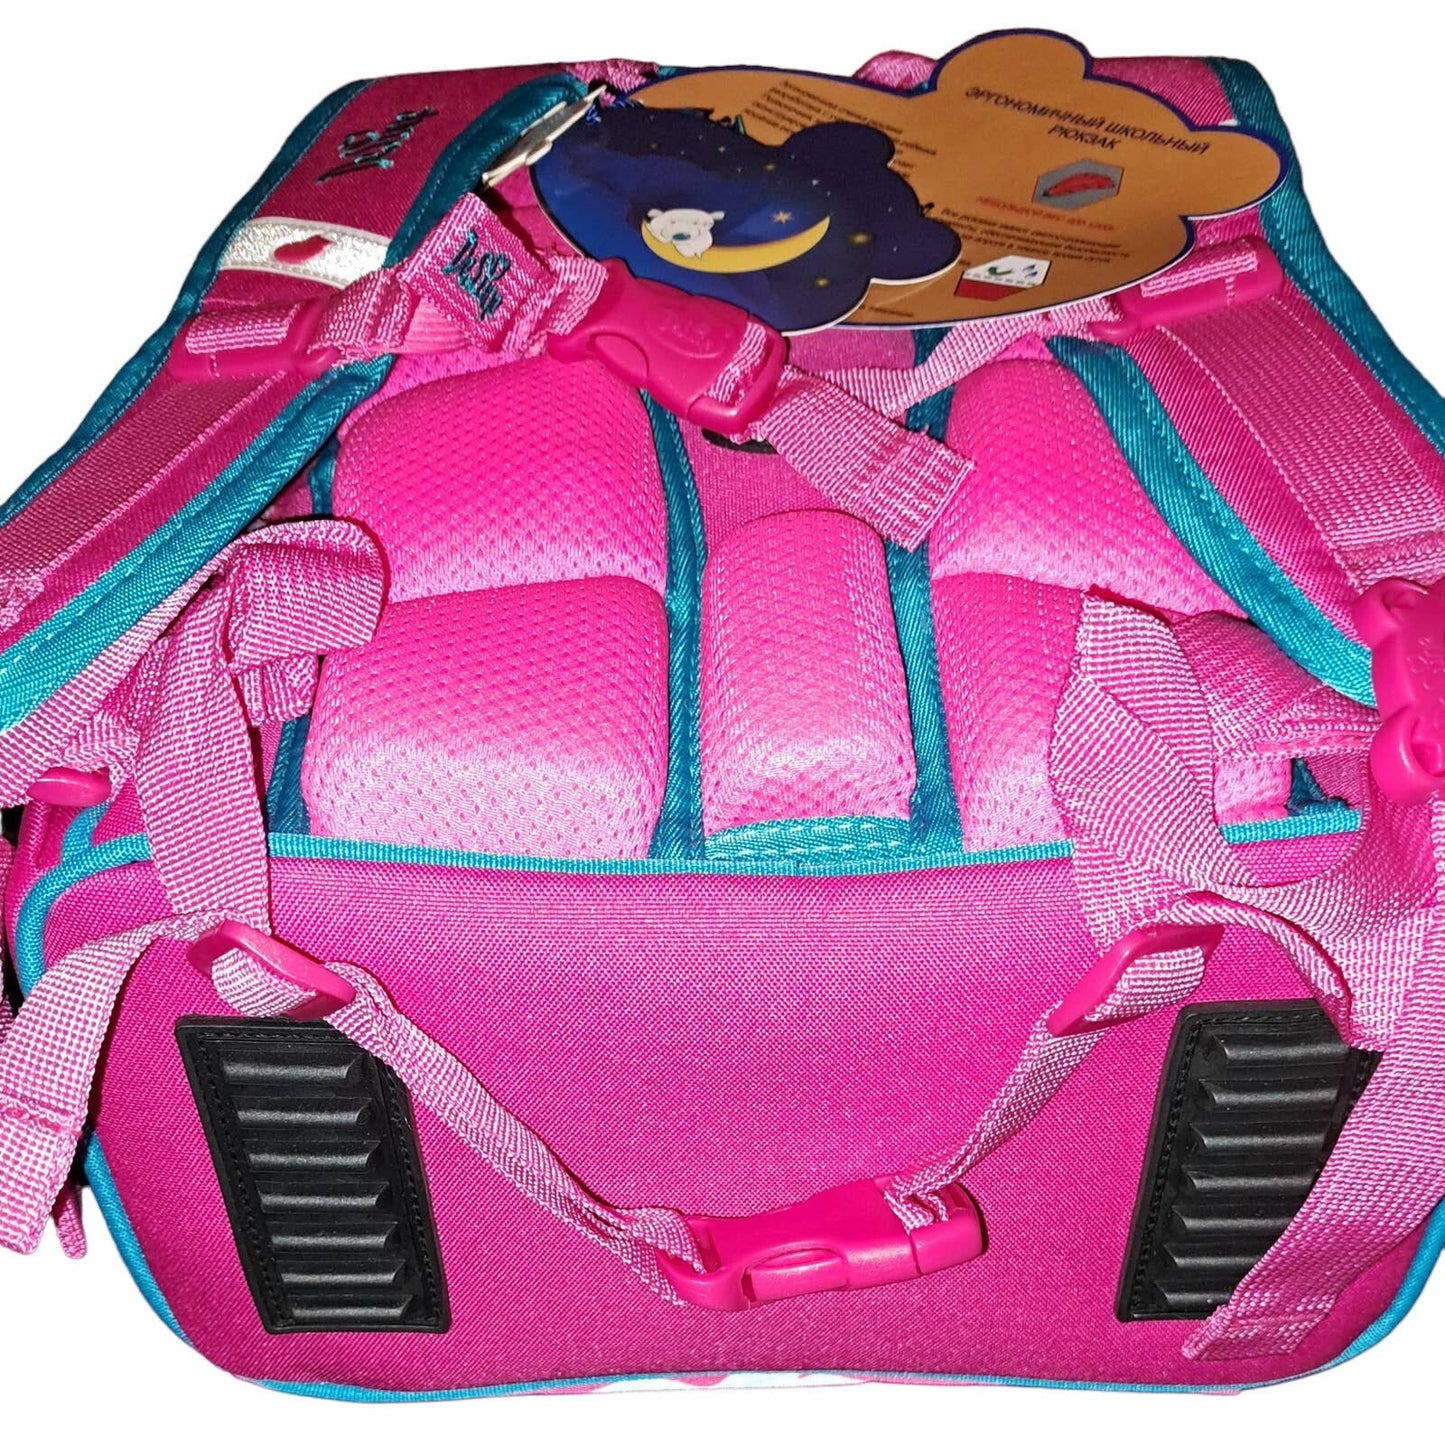 SALE!!! New Delune mermaid backpack spine protect